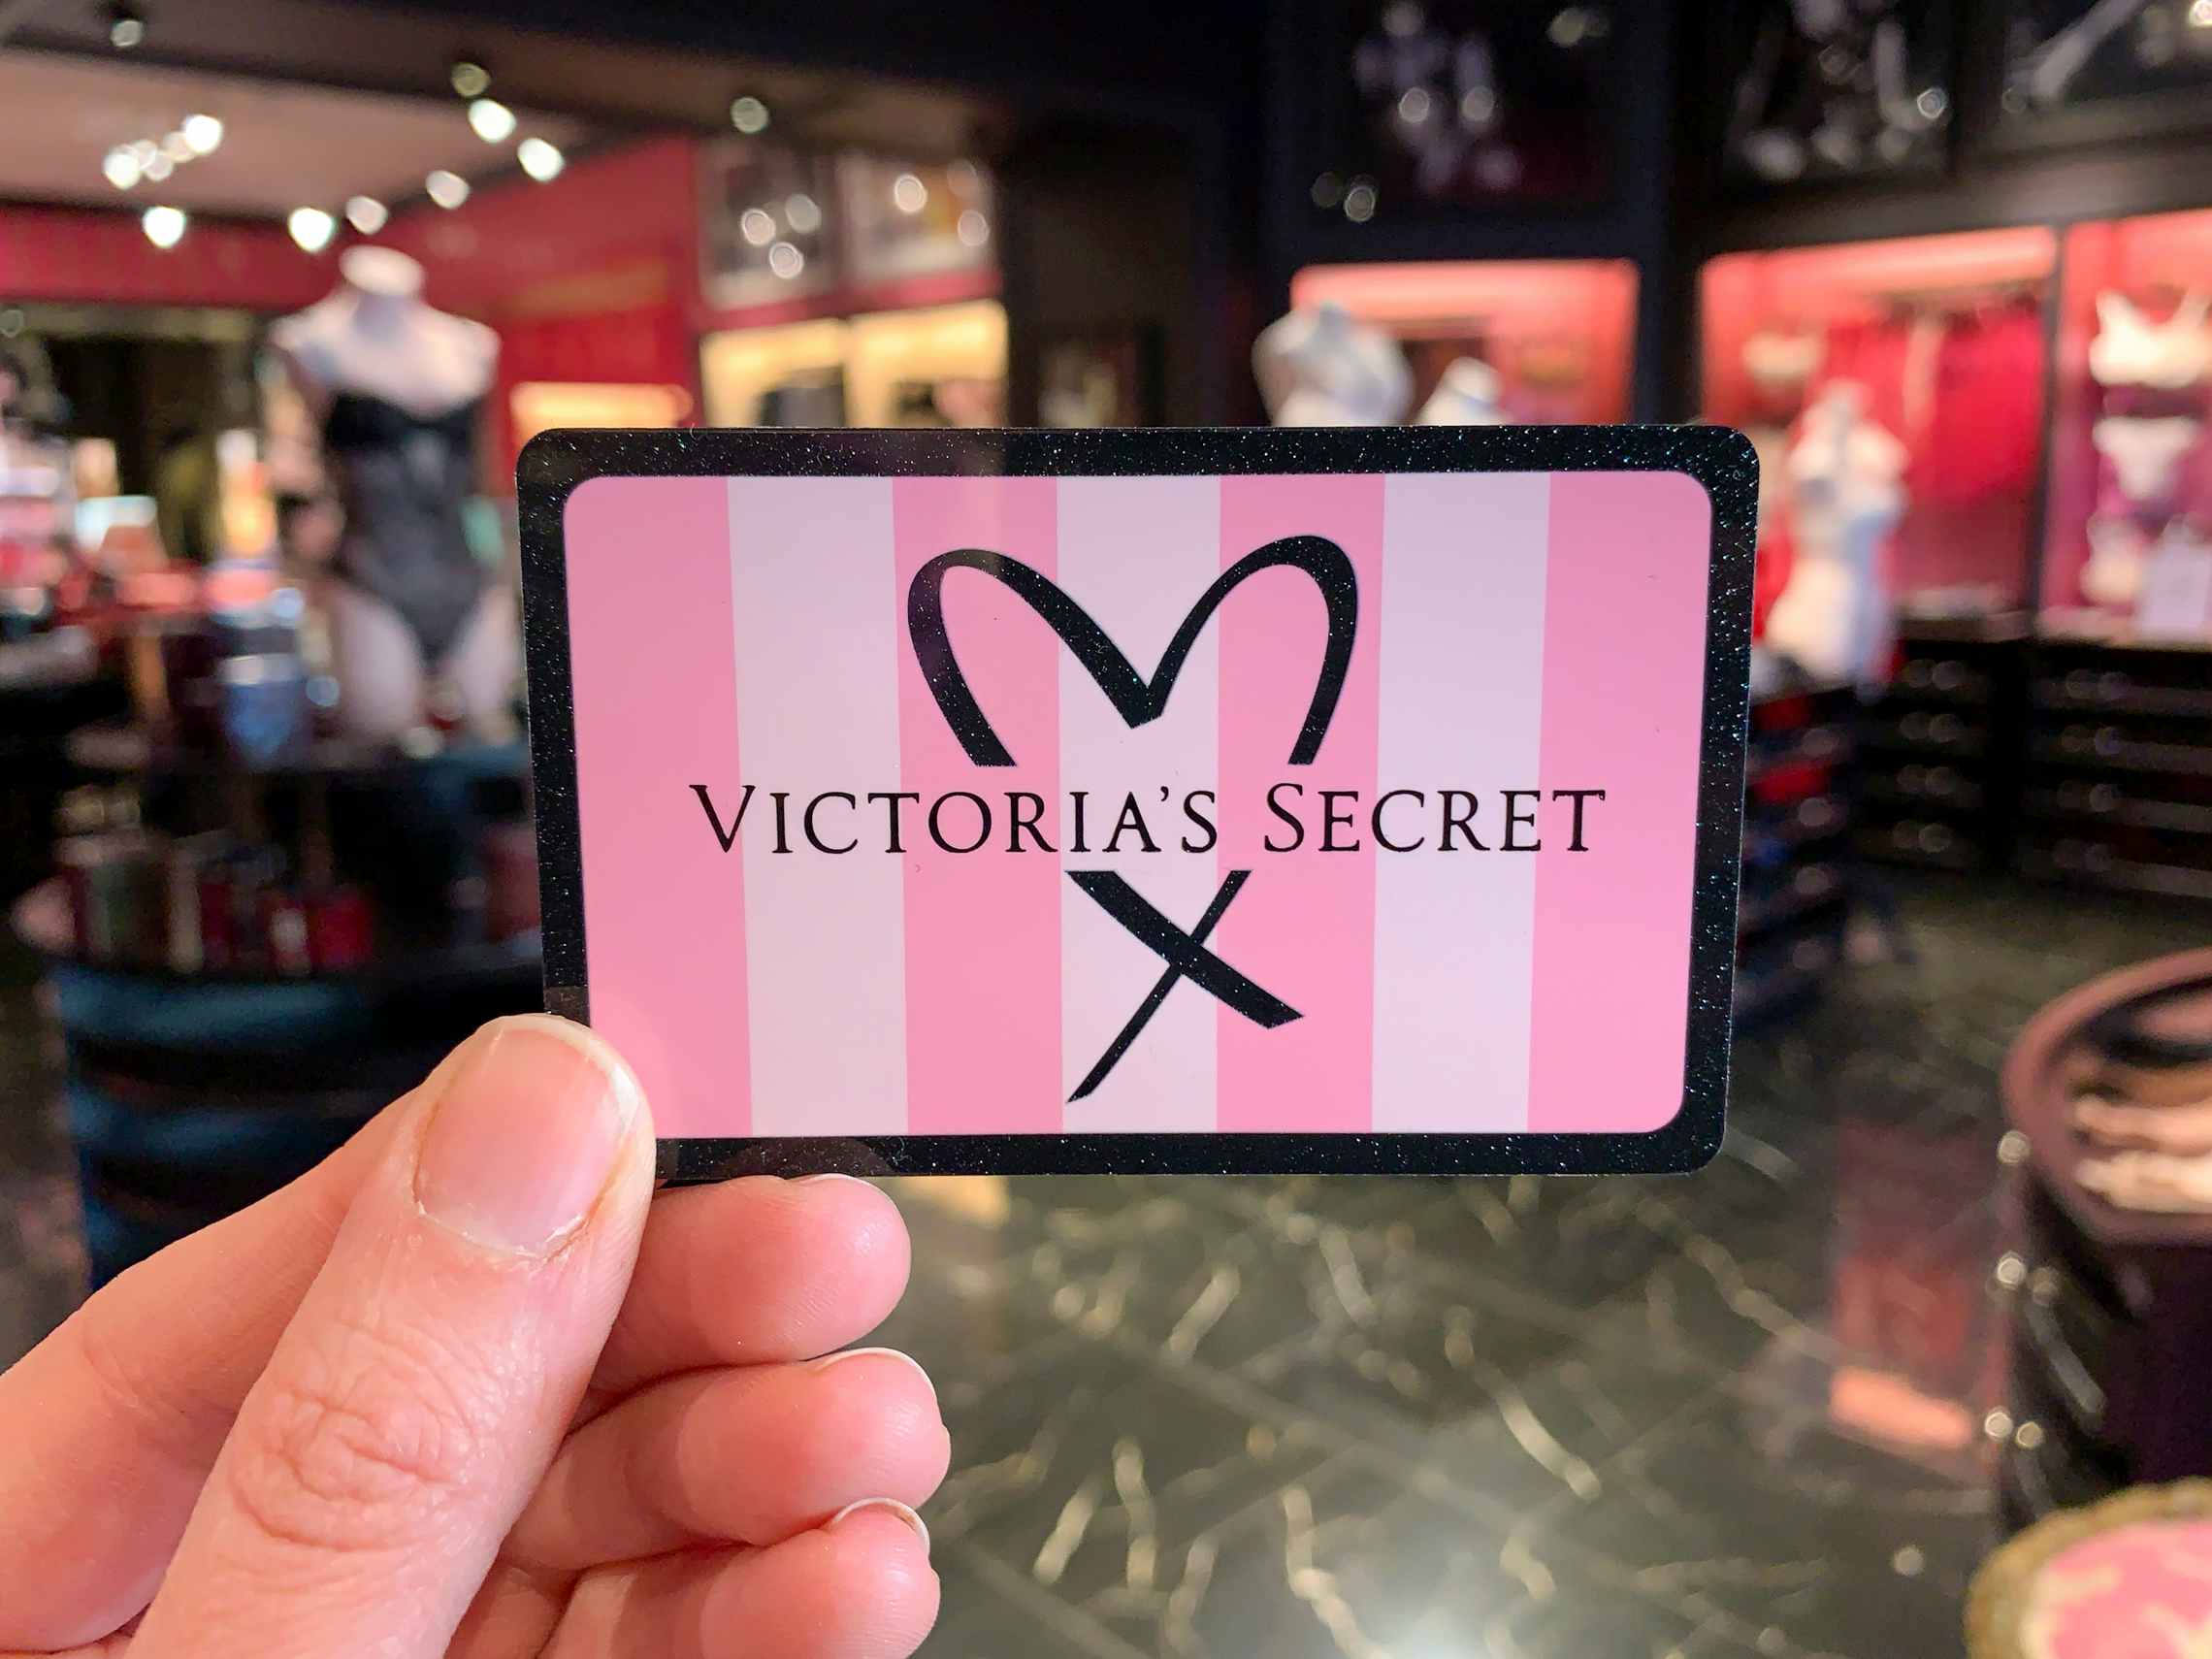 Victoria's Secret just extended its Cyber Monday sale